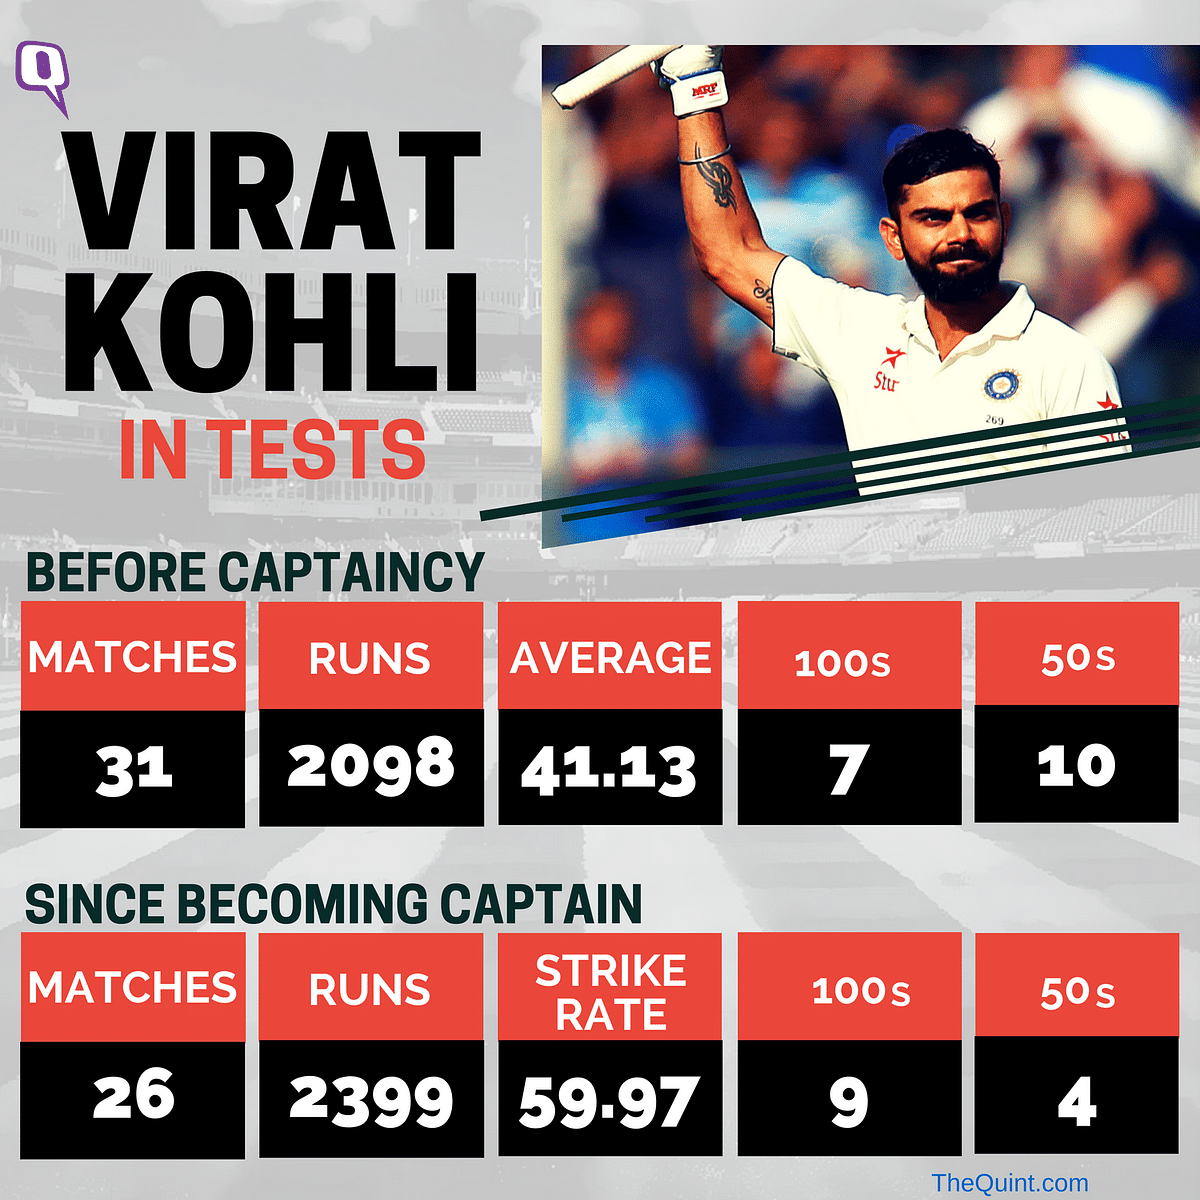  Just two and a half years into his captaincy, Virat holds the record for the highest-score by an Indian captain.